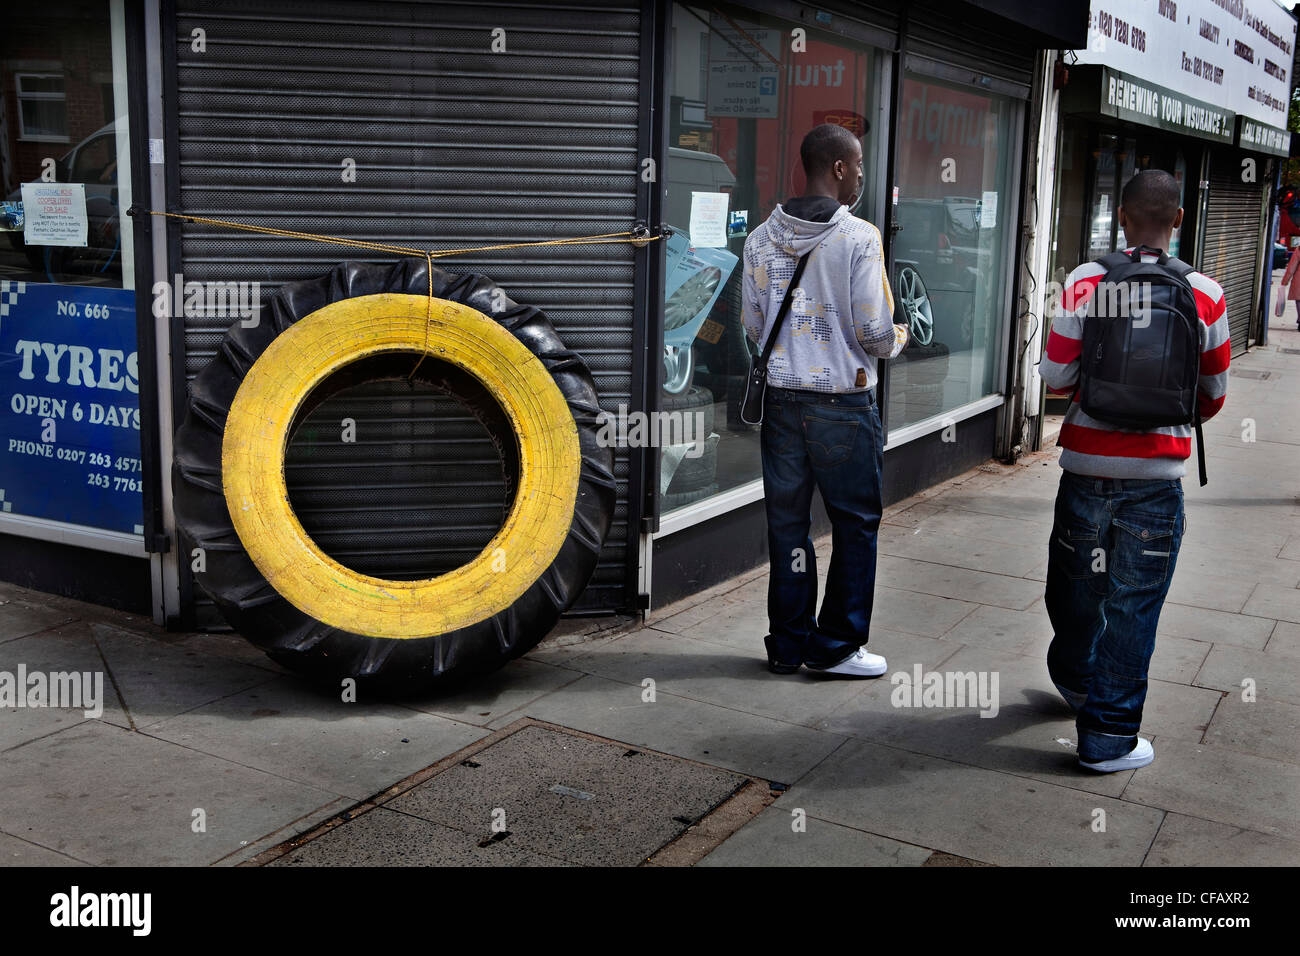 Huge car tire in front of a shop, Holloway road, London Stock Photo